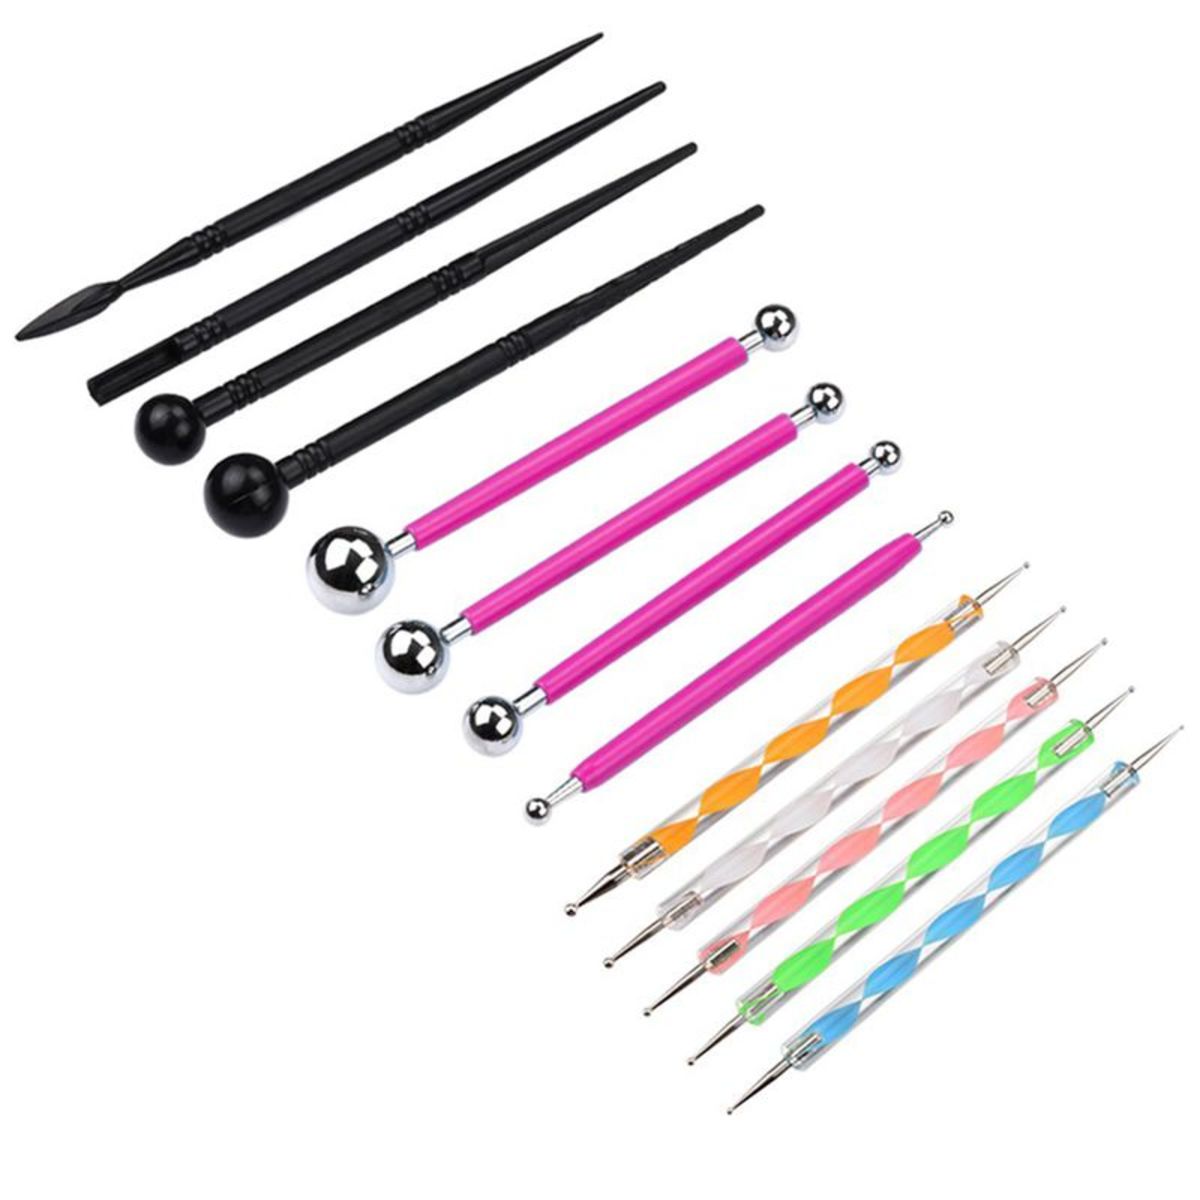 Dot painting tools are similar to those used for nail painting.